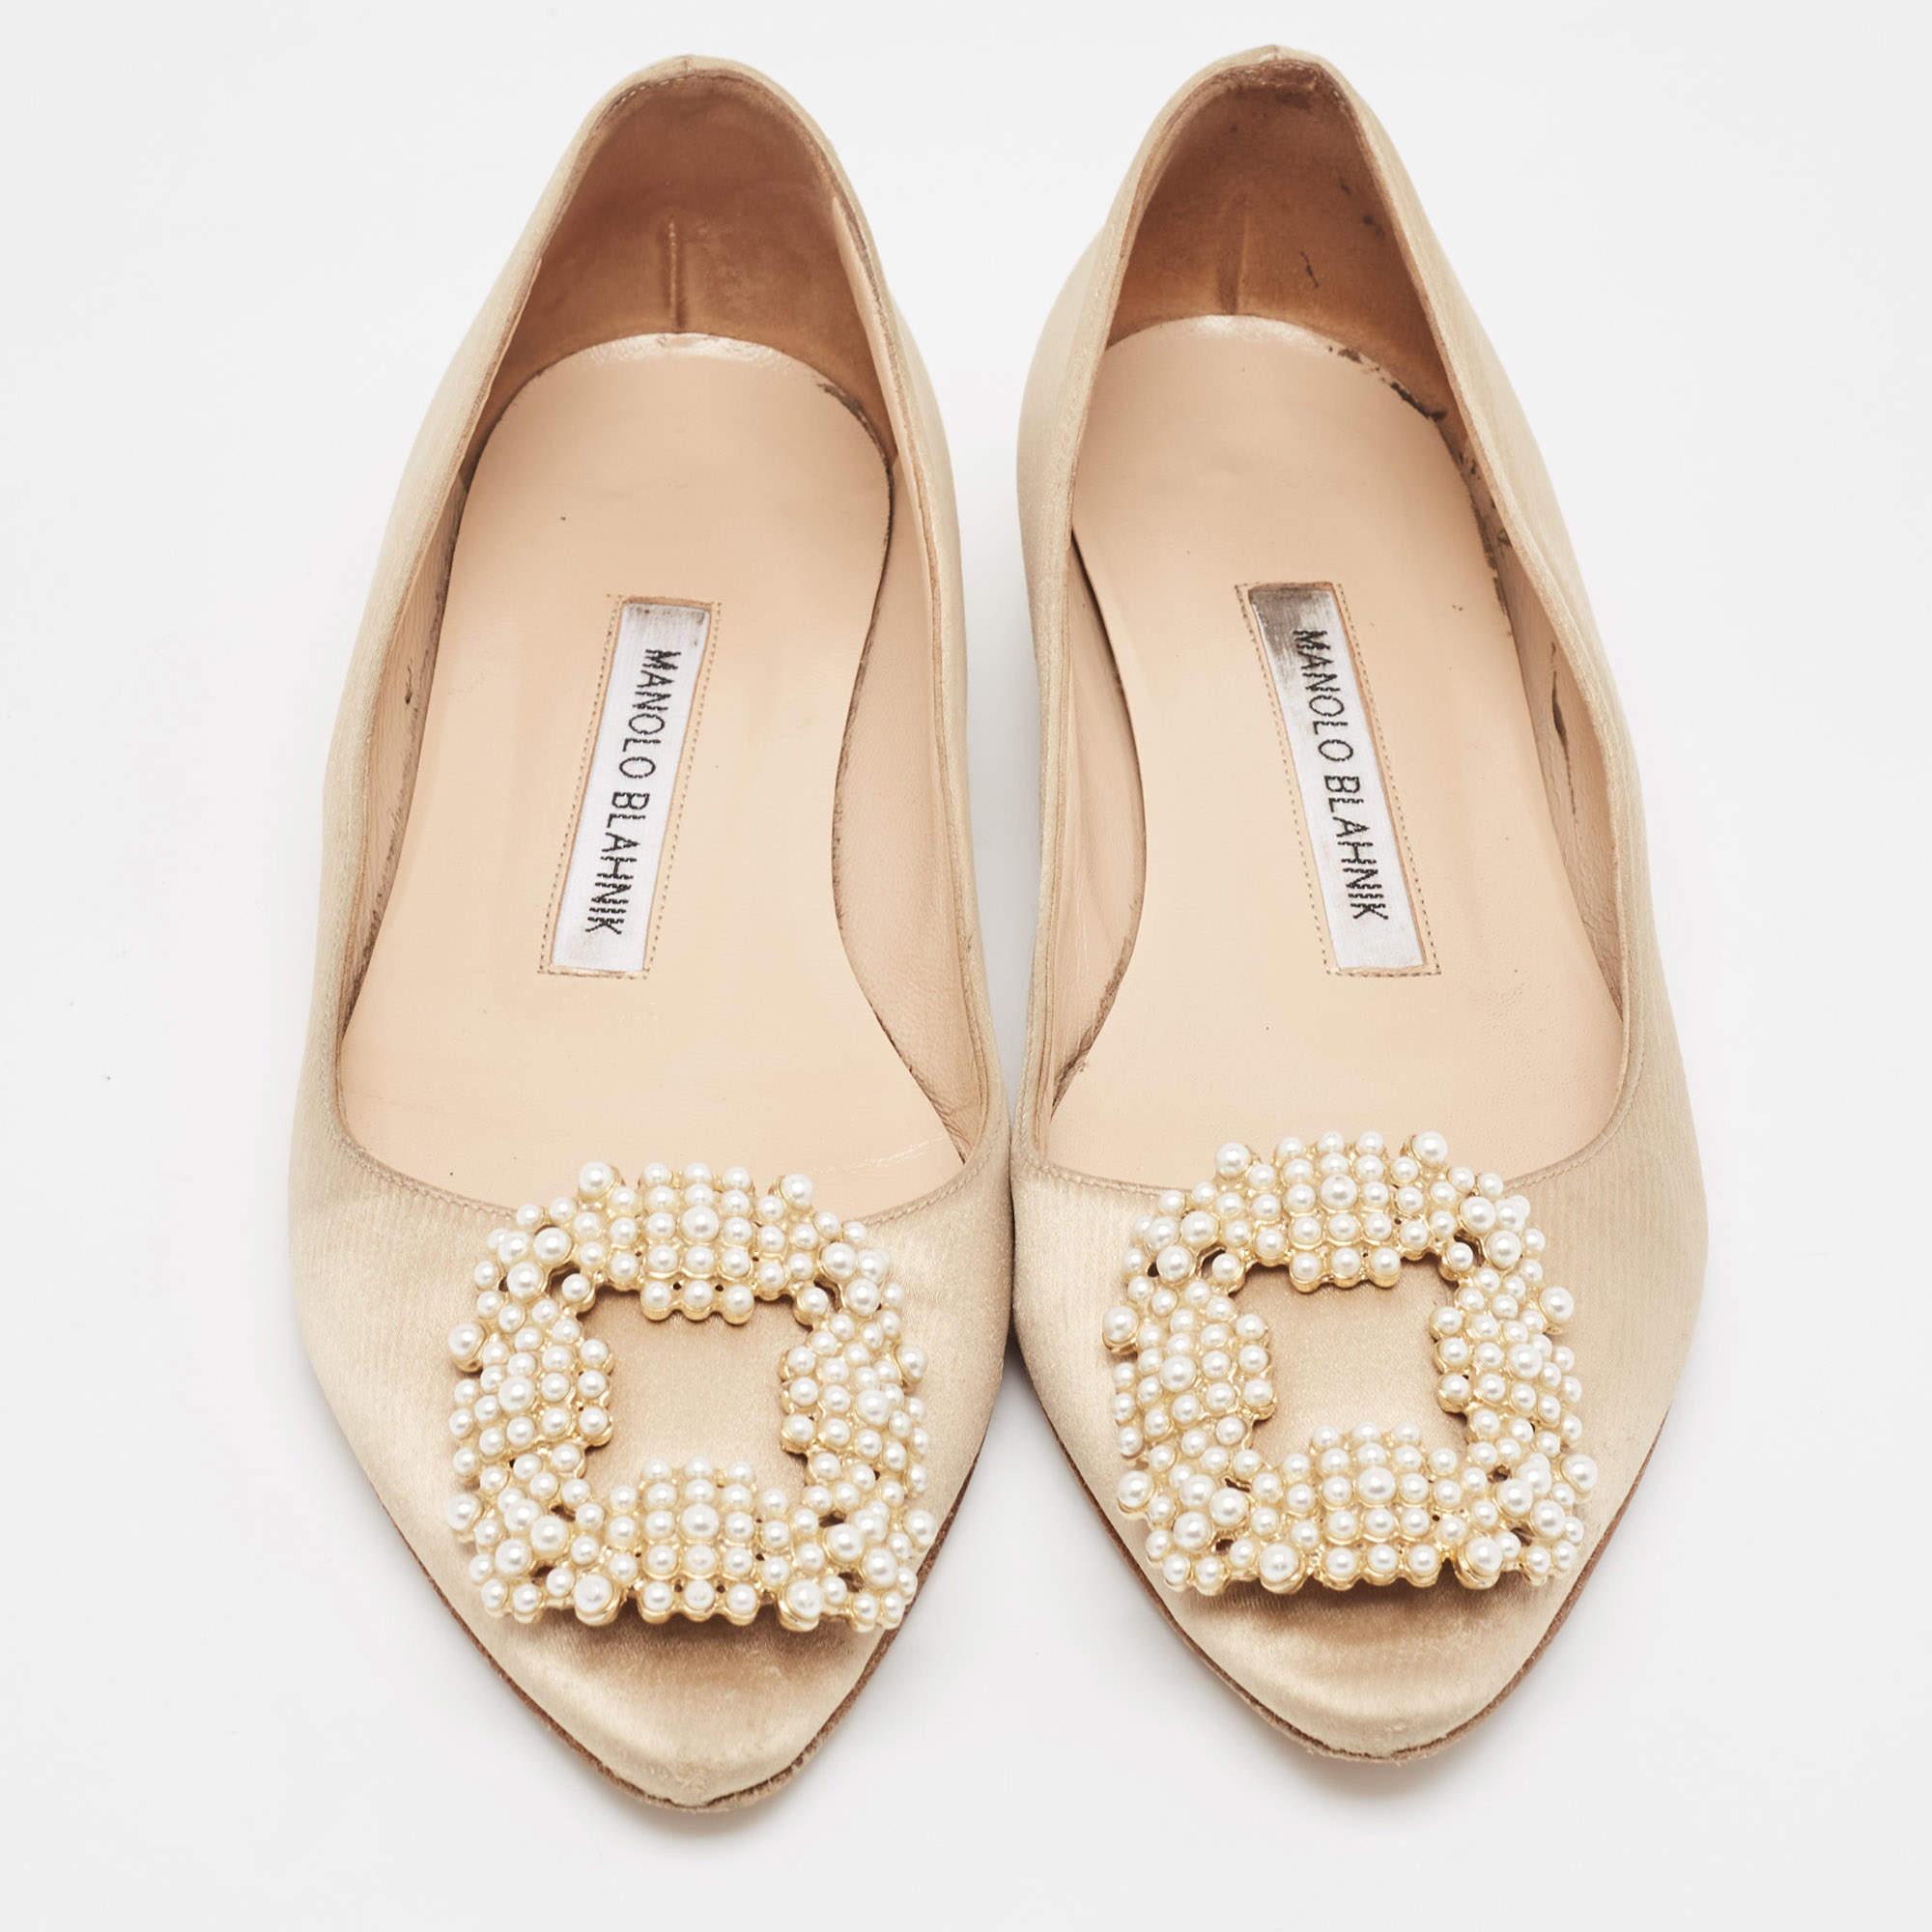 You know you're going to have a glamorous day the moment you put these Hangisi ballet flats on. They are a Manolo Blahnik creation, meticulously crafted from satin and lined with leather on the insoles. The pair carries a subtle beige hue and faux